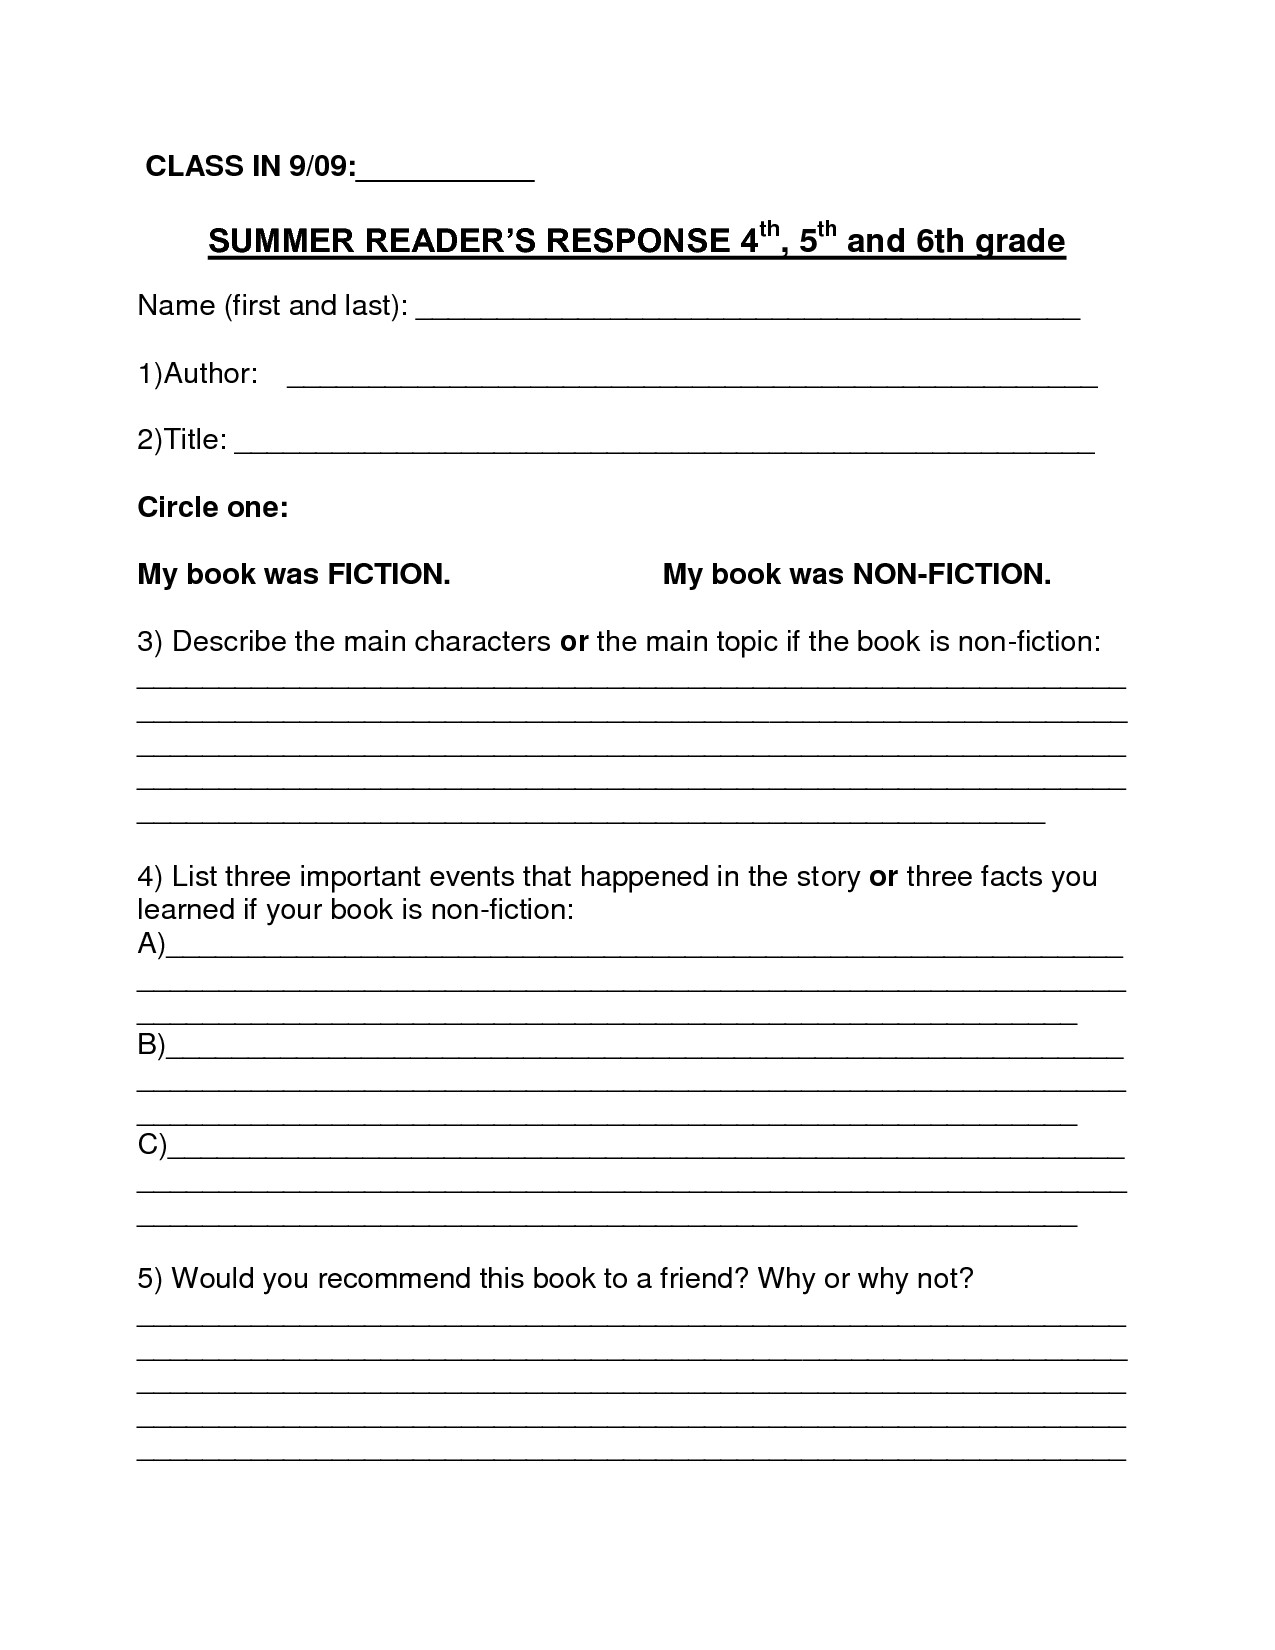 Image result for book report summer reading form 6th grade